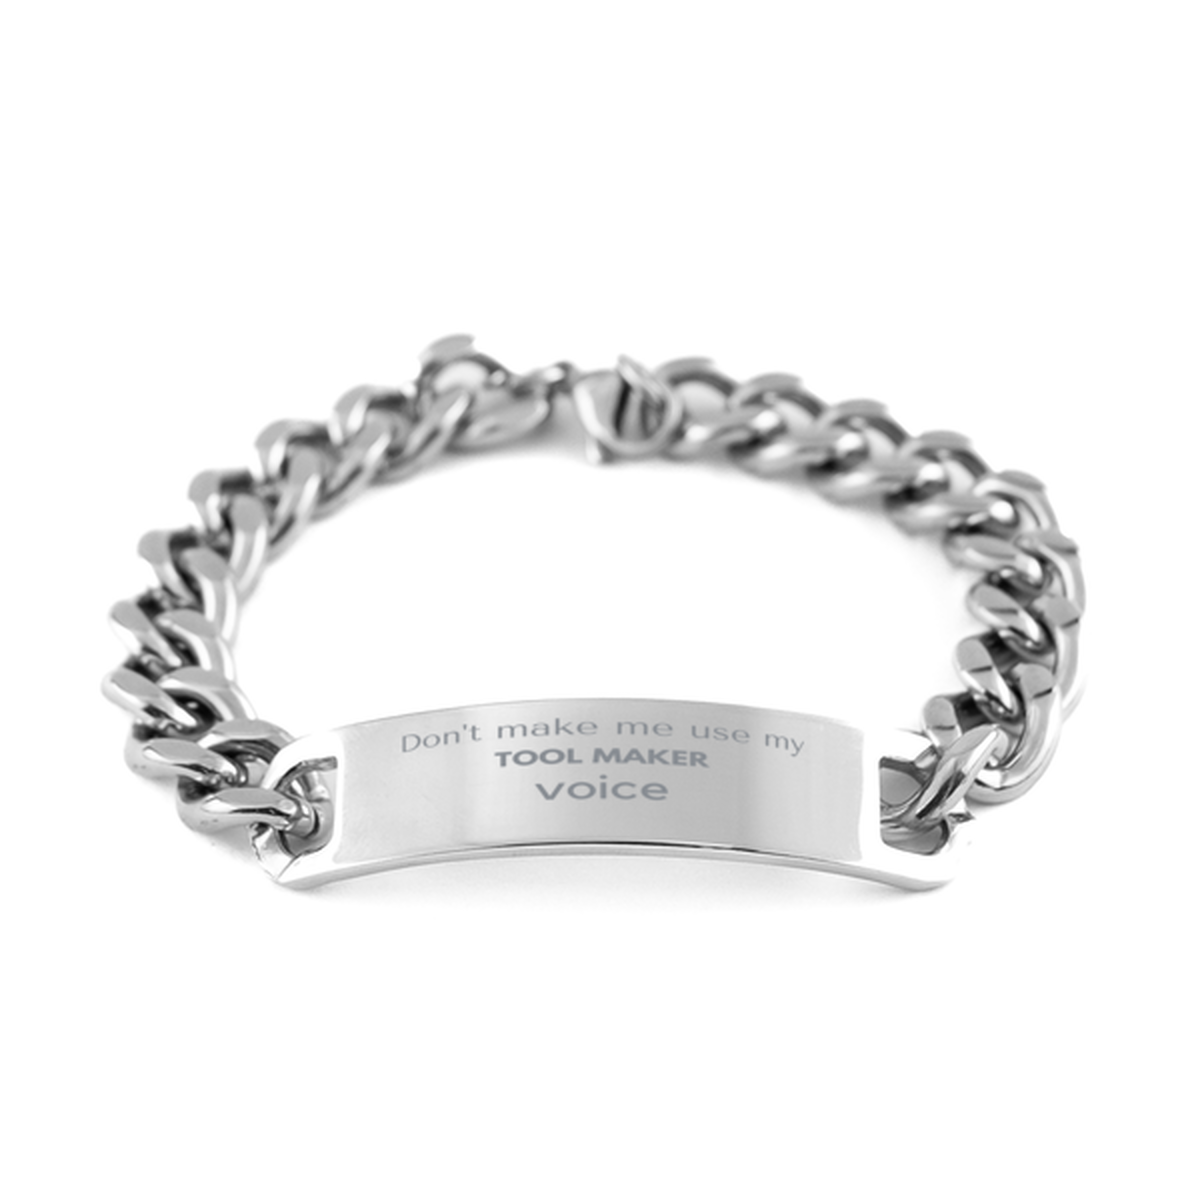 Don't make me use my Tool Maker voice, Sarcasm Tool Maker Gifts, Christmas Tool Maker Cuban Chain Stainless Steel Bracelet Birthday Unique Gifts For Tool Maker Coworkers, Men, Women, Colleague, Friends